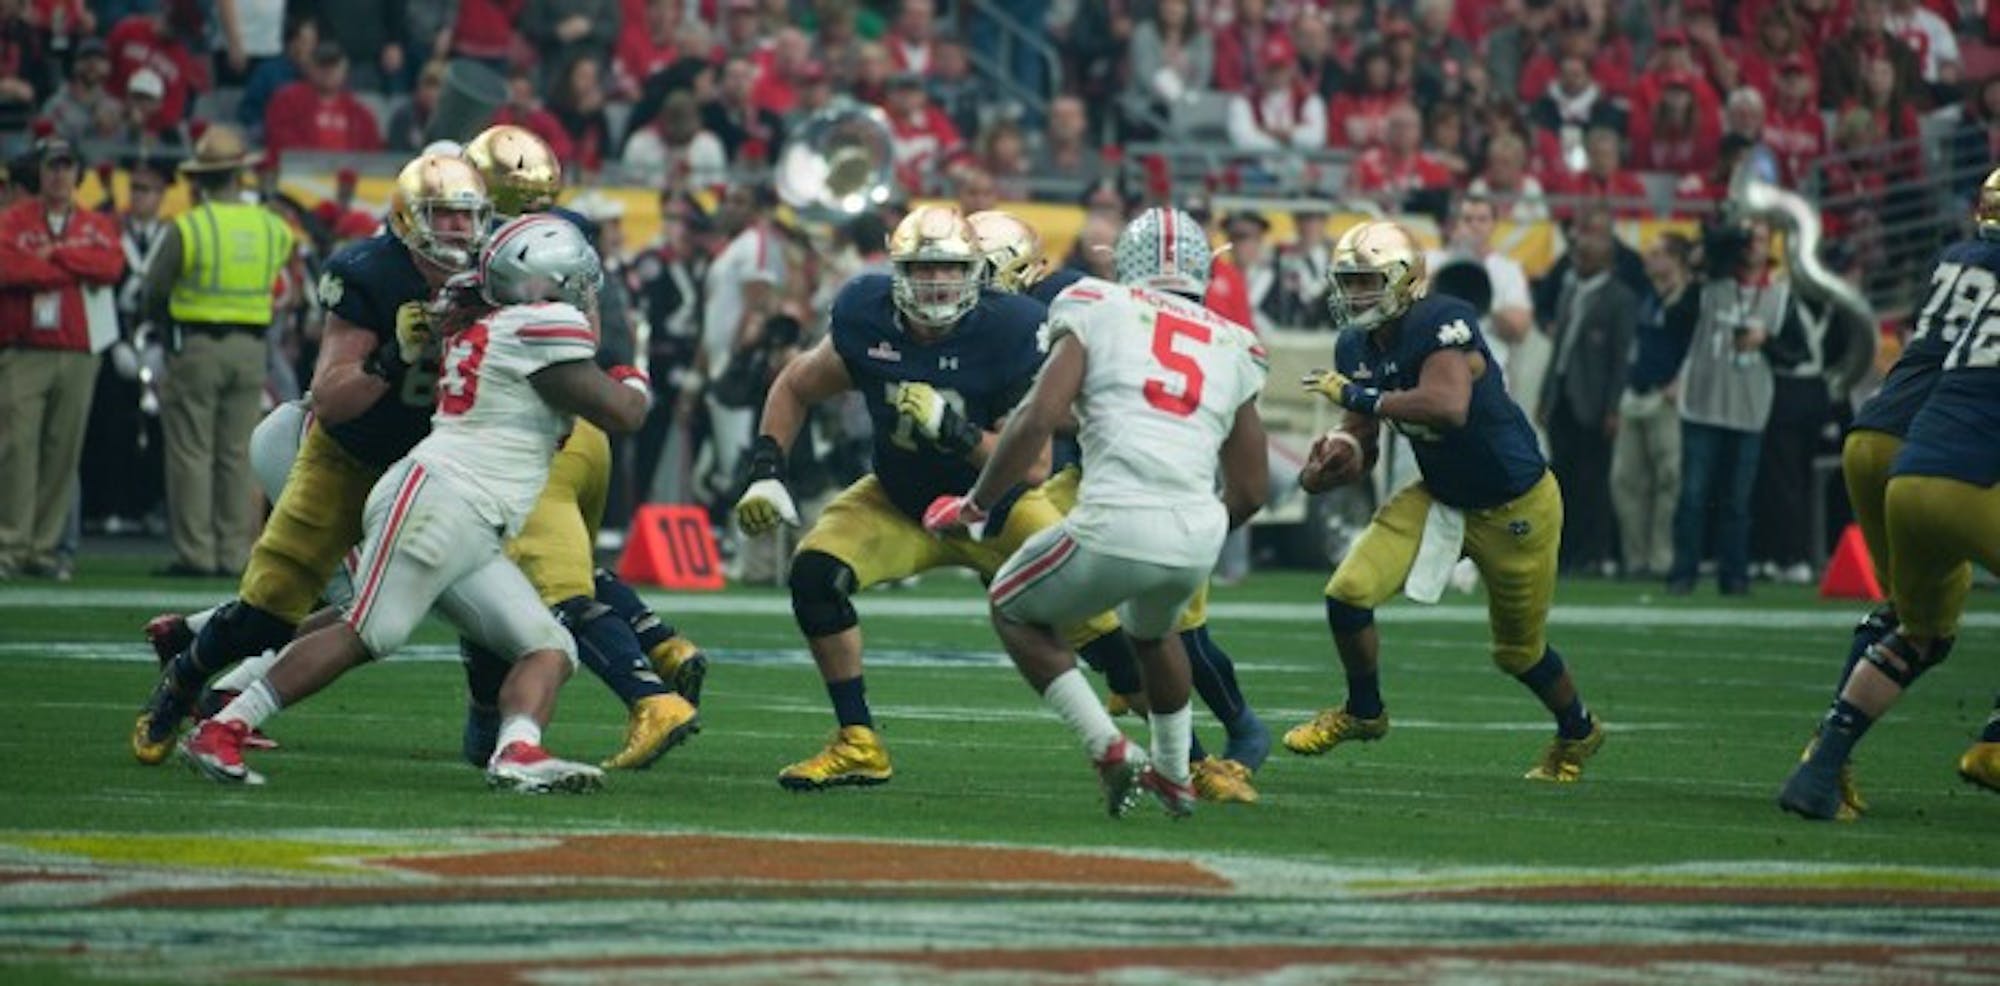 Irish junior offensive lineman Steve Elmer, left, looks to make a block during Notre Dame’s 44-28 loss to Ohio State on Jan. 1.